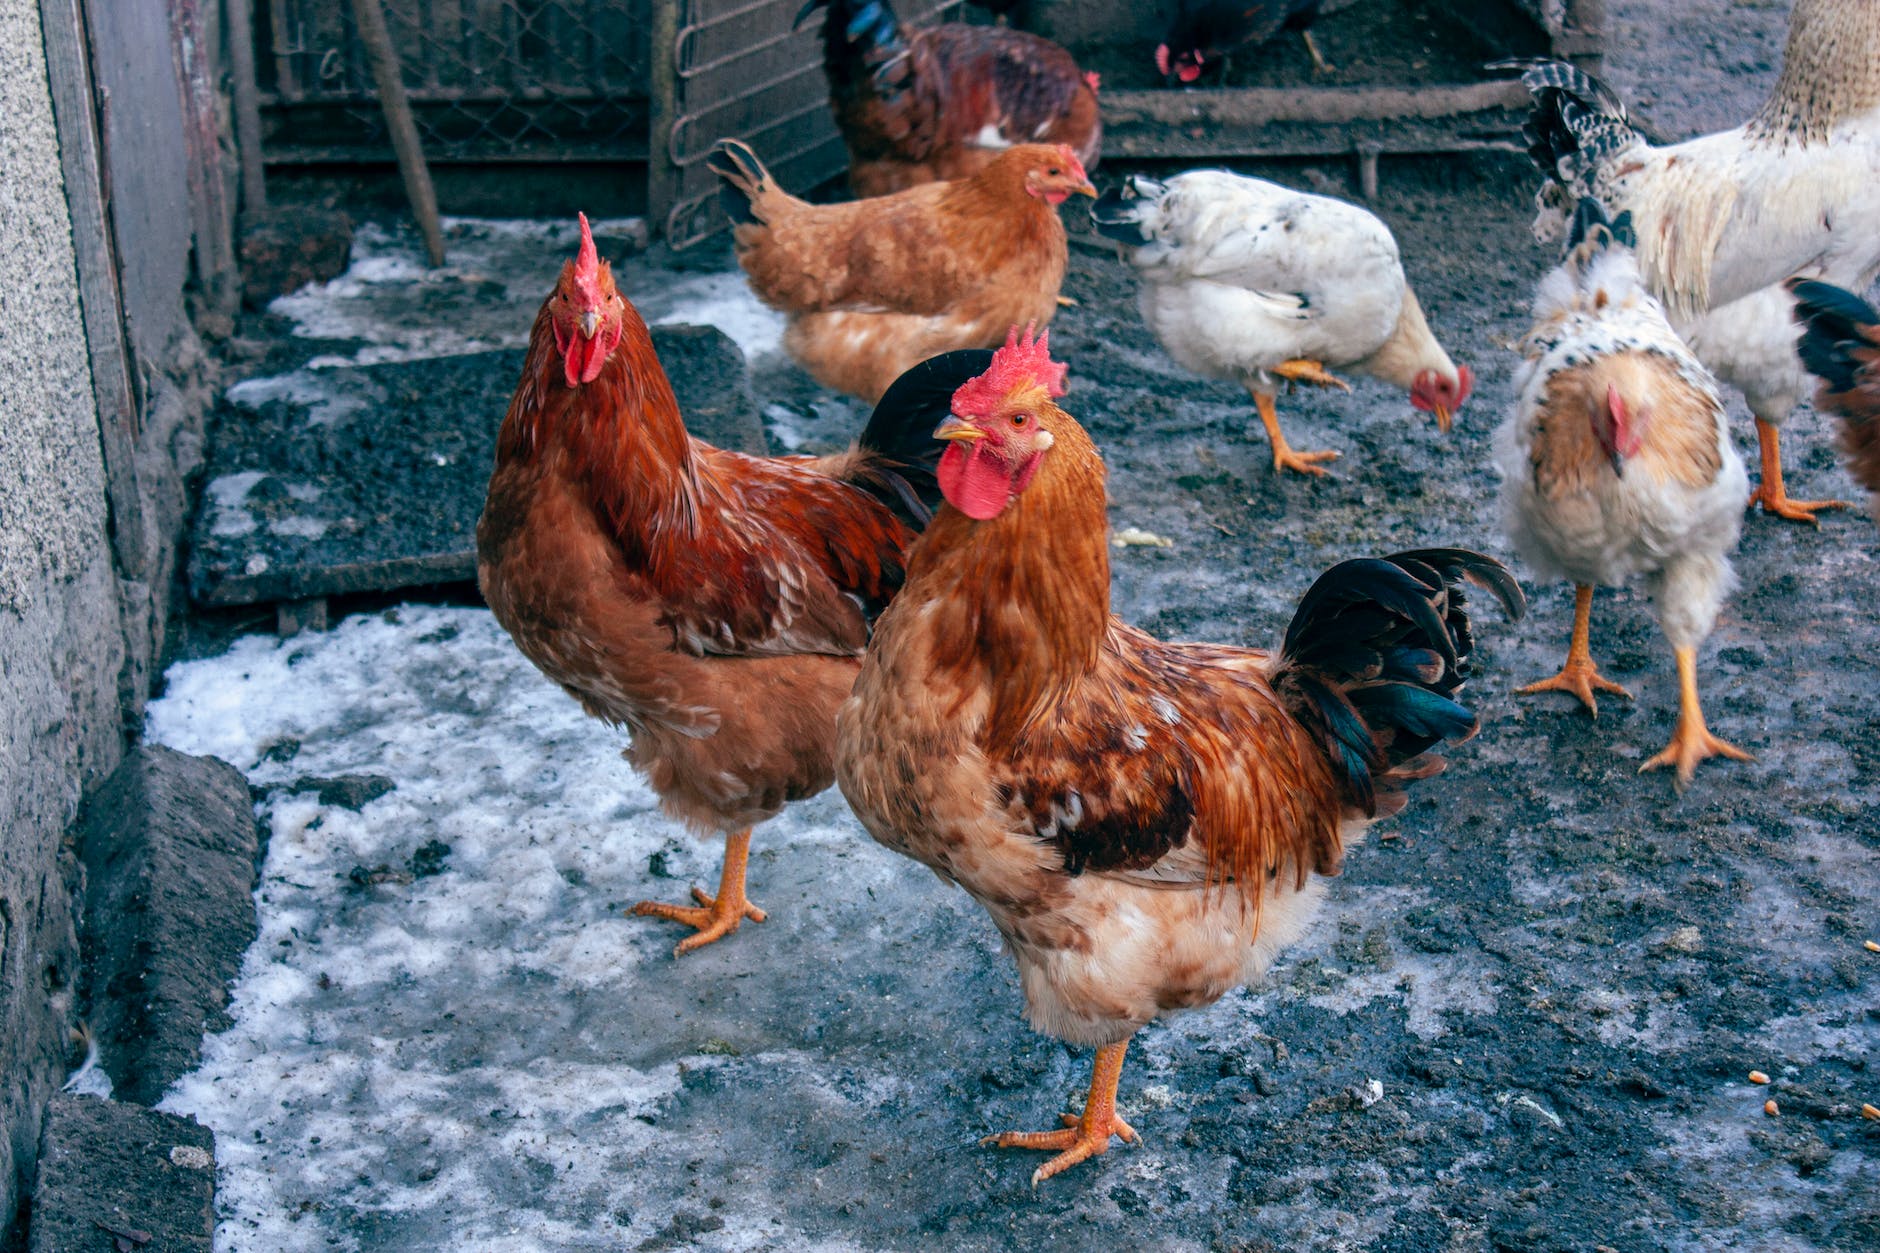 roosters and hens on a farm in winter
winter chicken care